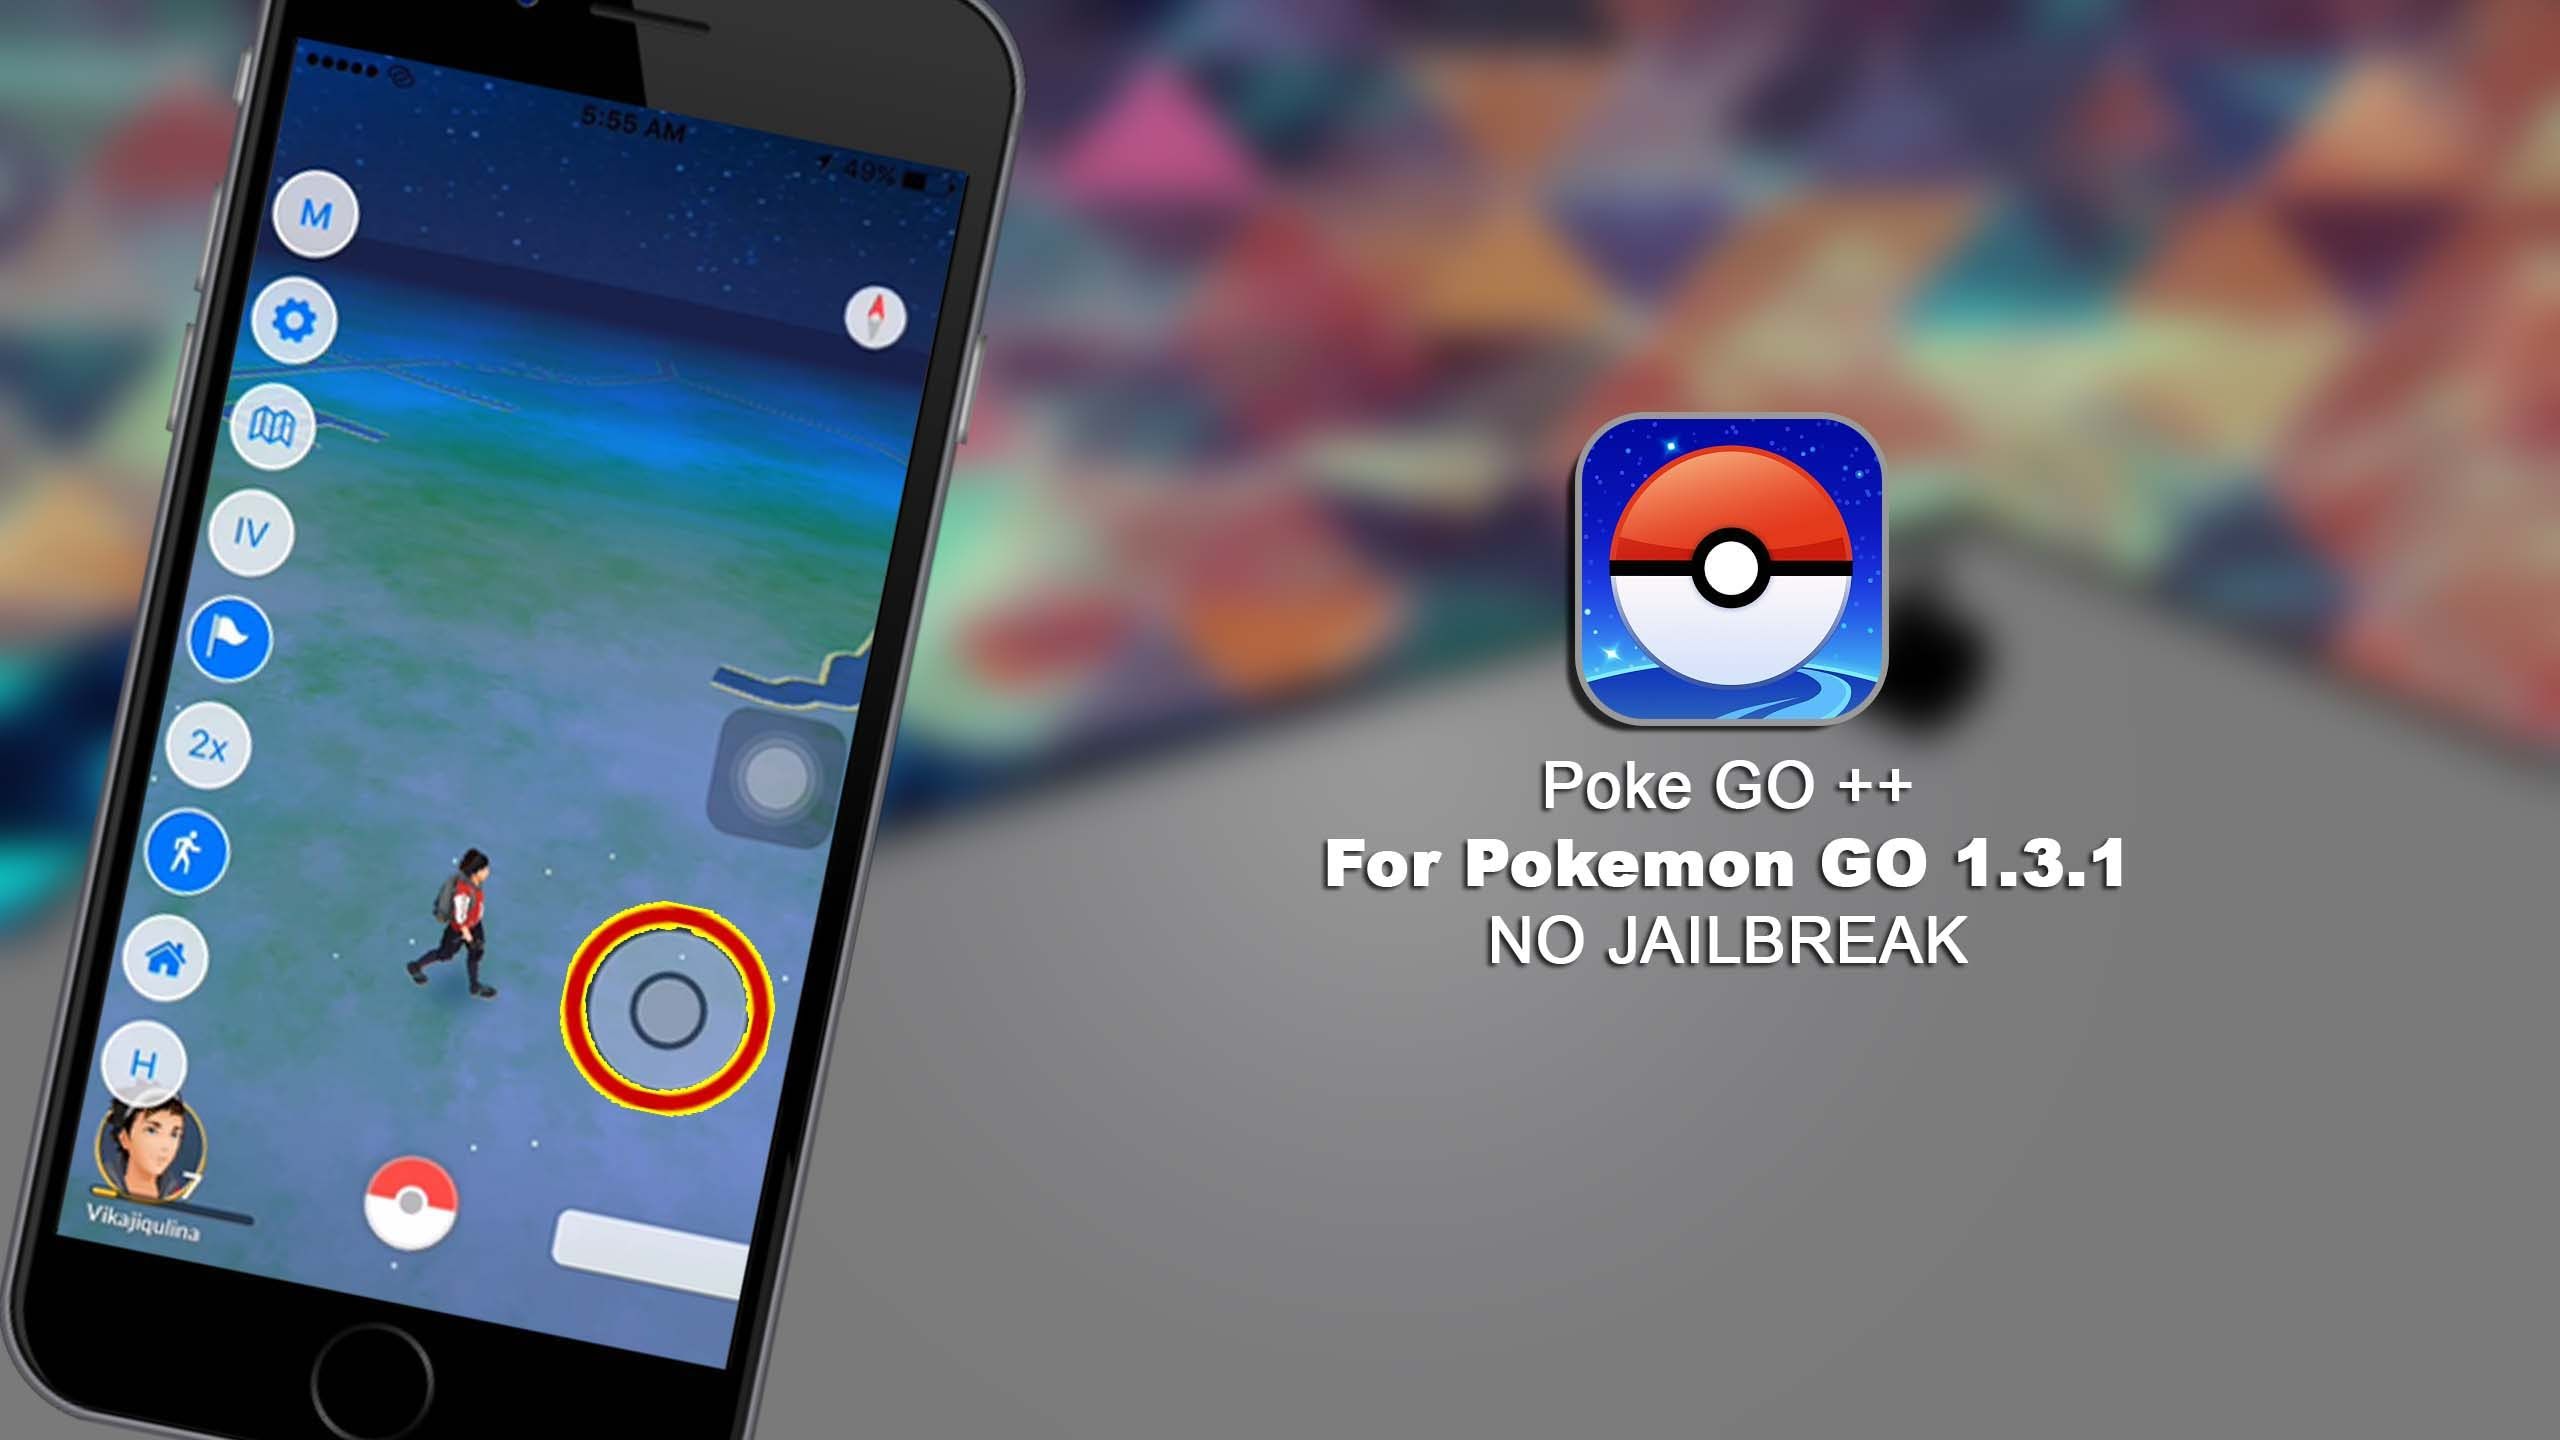 How To Get A Joystick In Pokemon Go On iPhone